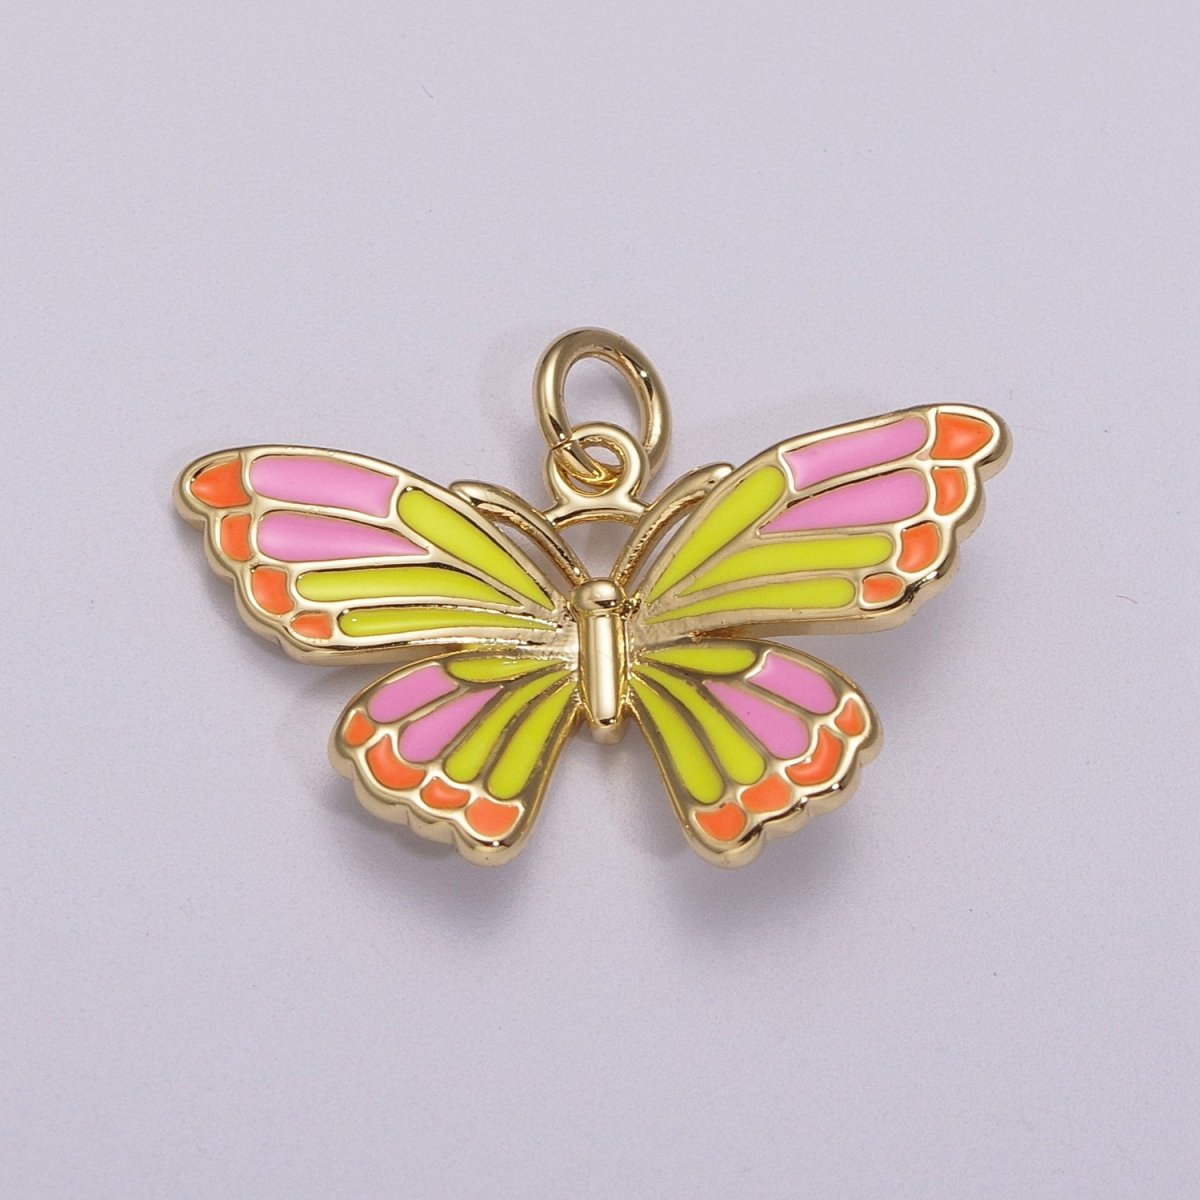 14K Gold Filled Colorful Enamel Butterfly Pendant Mariposa Charm, Pink Teal Yellow Purple Green Enamel Butterfly, Necklace Pendant M-907 to M-911 - DLUXCA